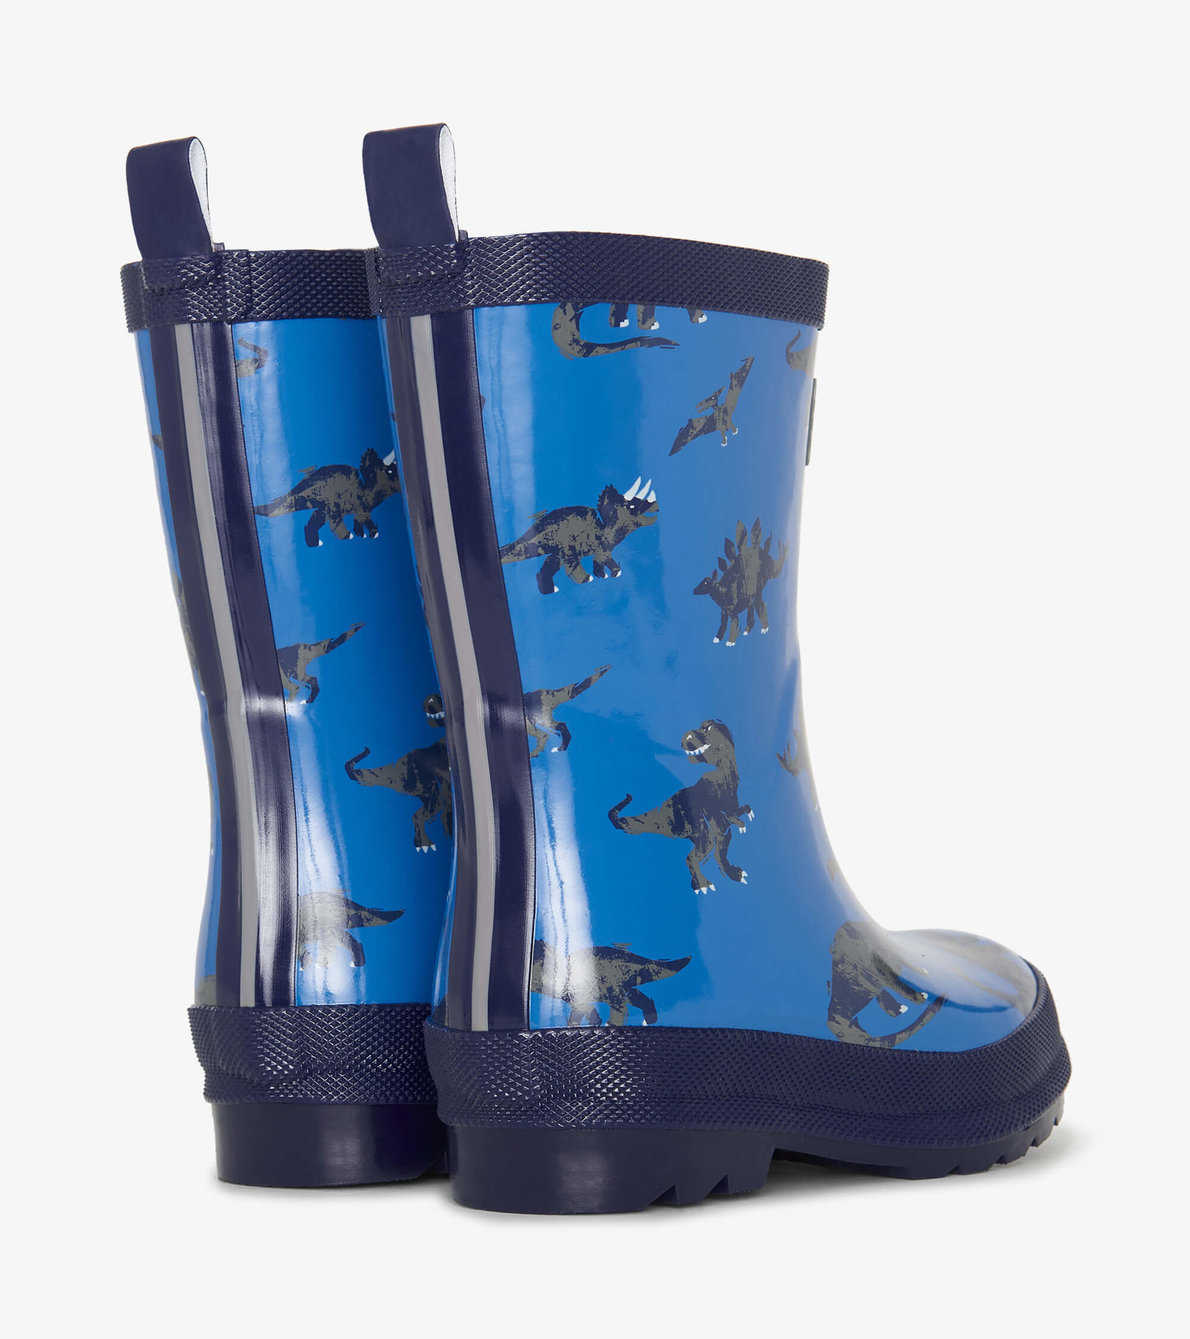 View larger image of Boys Dinosaur Shiny Wellies